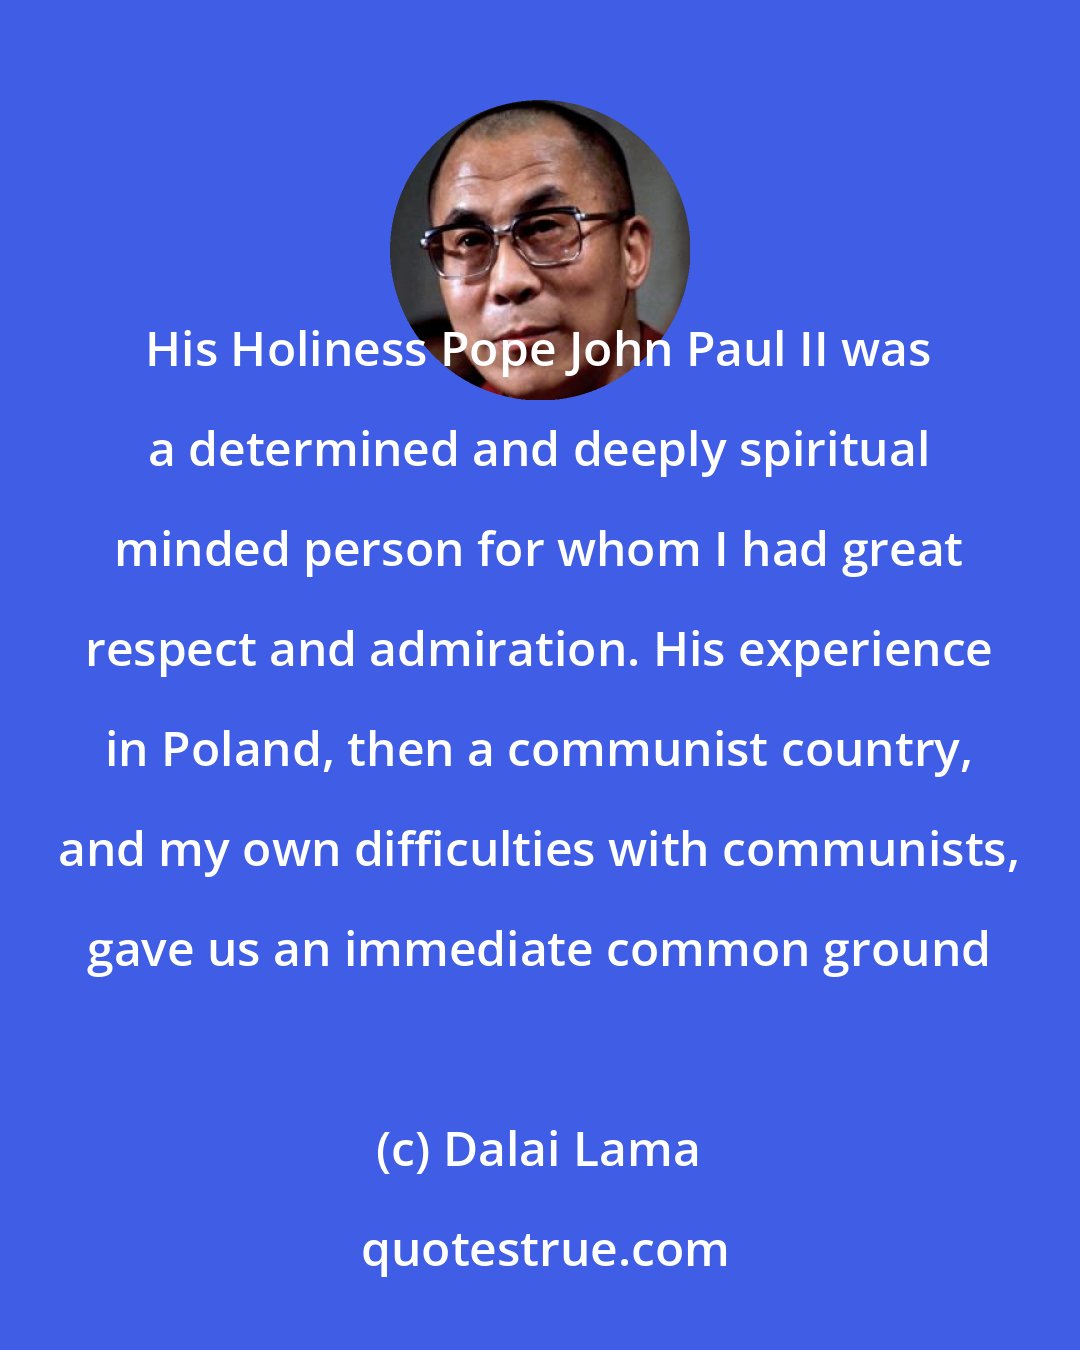 Dalai Lama: His Holiness Pope John Paul II was a determined and deeply spiritual minded person for whom I had great respect and admiration. His experience in Poland, then a communist country, and my own difficulties with communists, gave us an immediate common ground